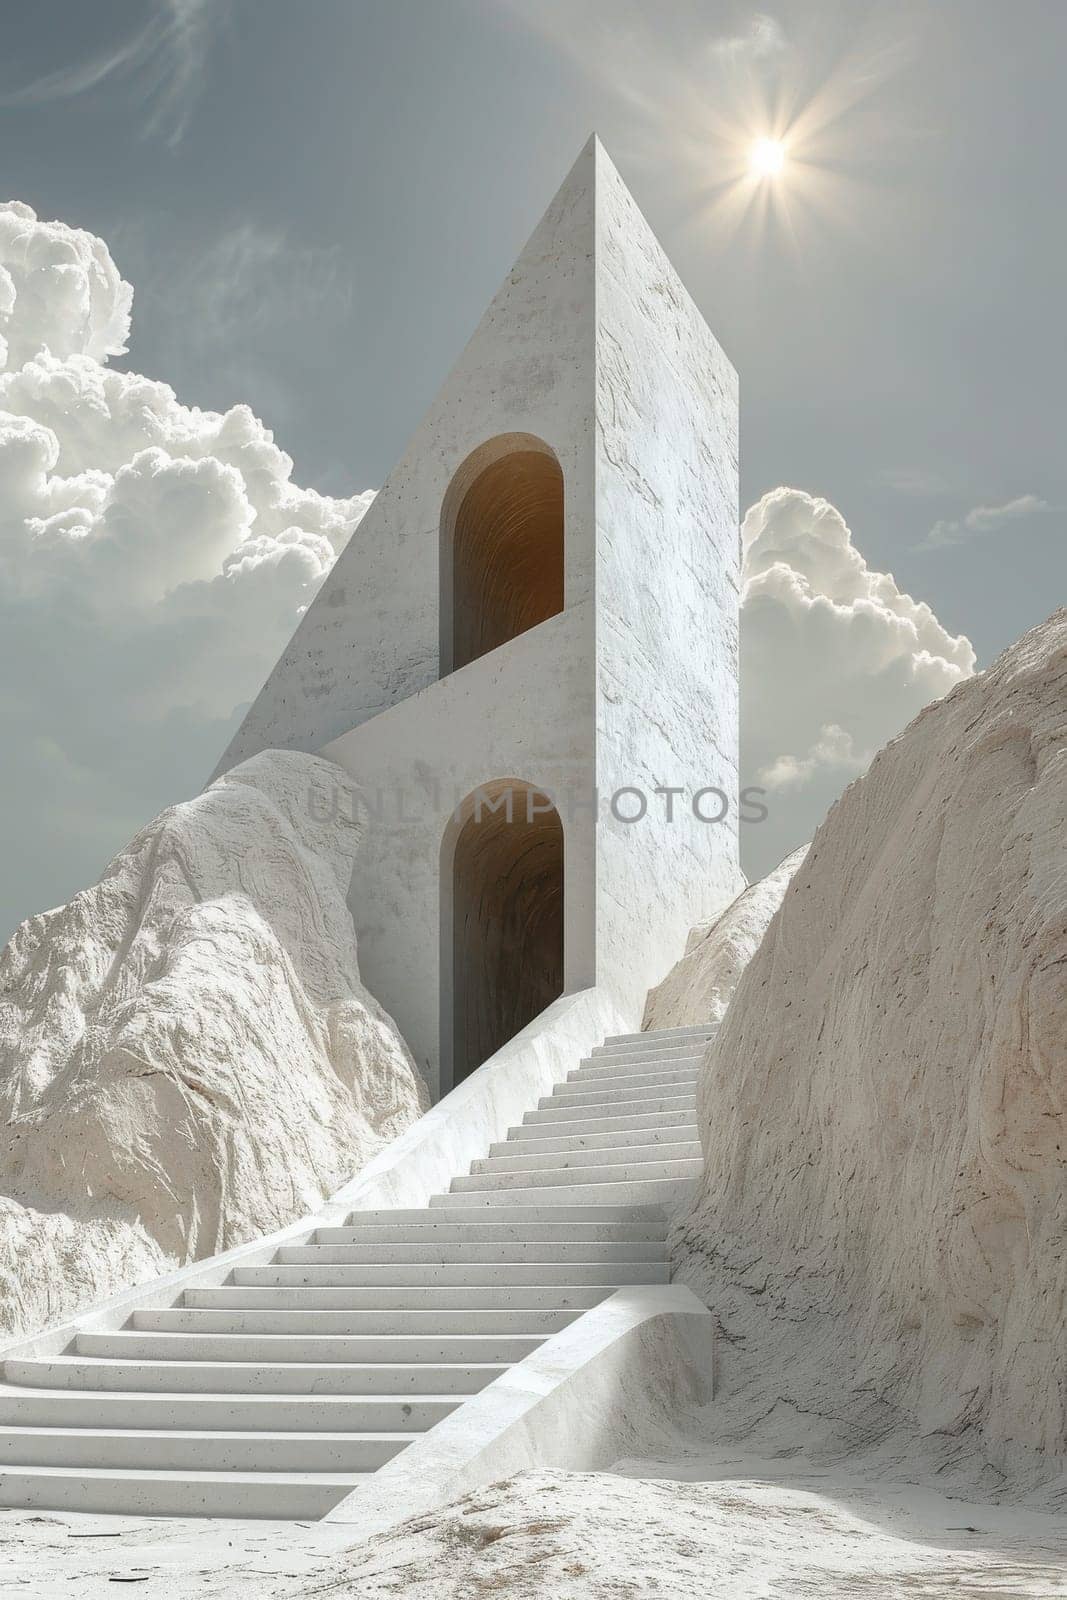 A large geometric with a triangular entrance is surrounded by a cloudy sky. The image has a mysterious and intriguing mood, as the pyramid seems to be a gateway to another world or dimension